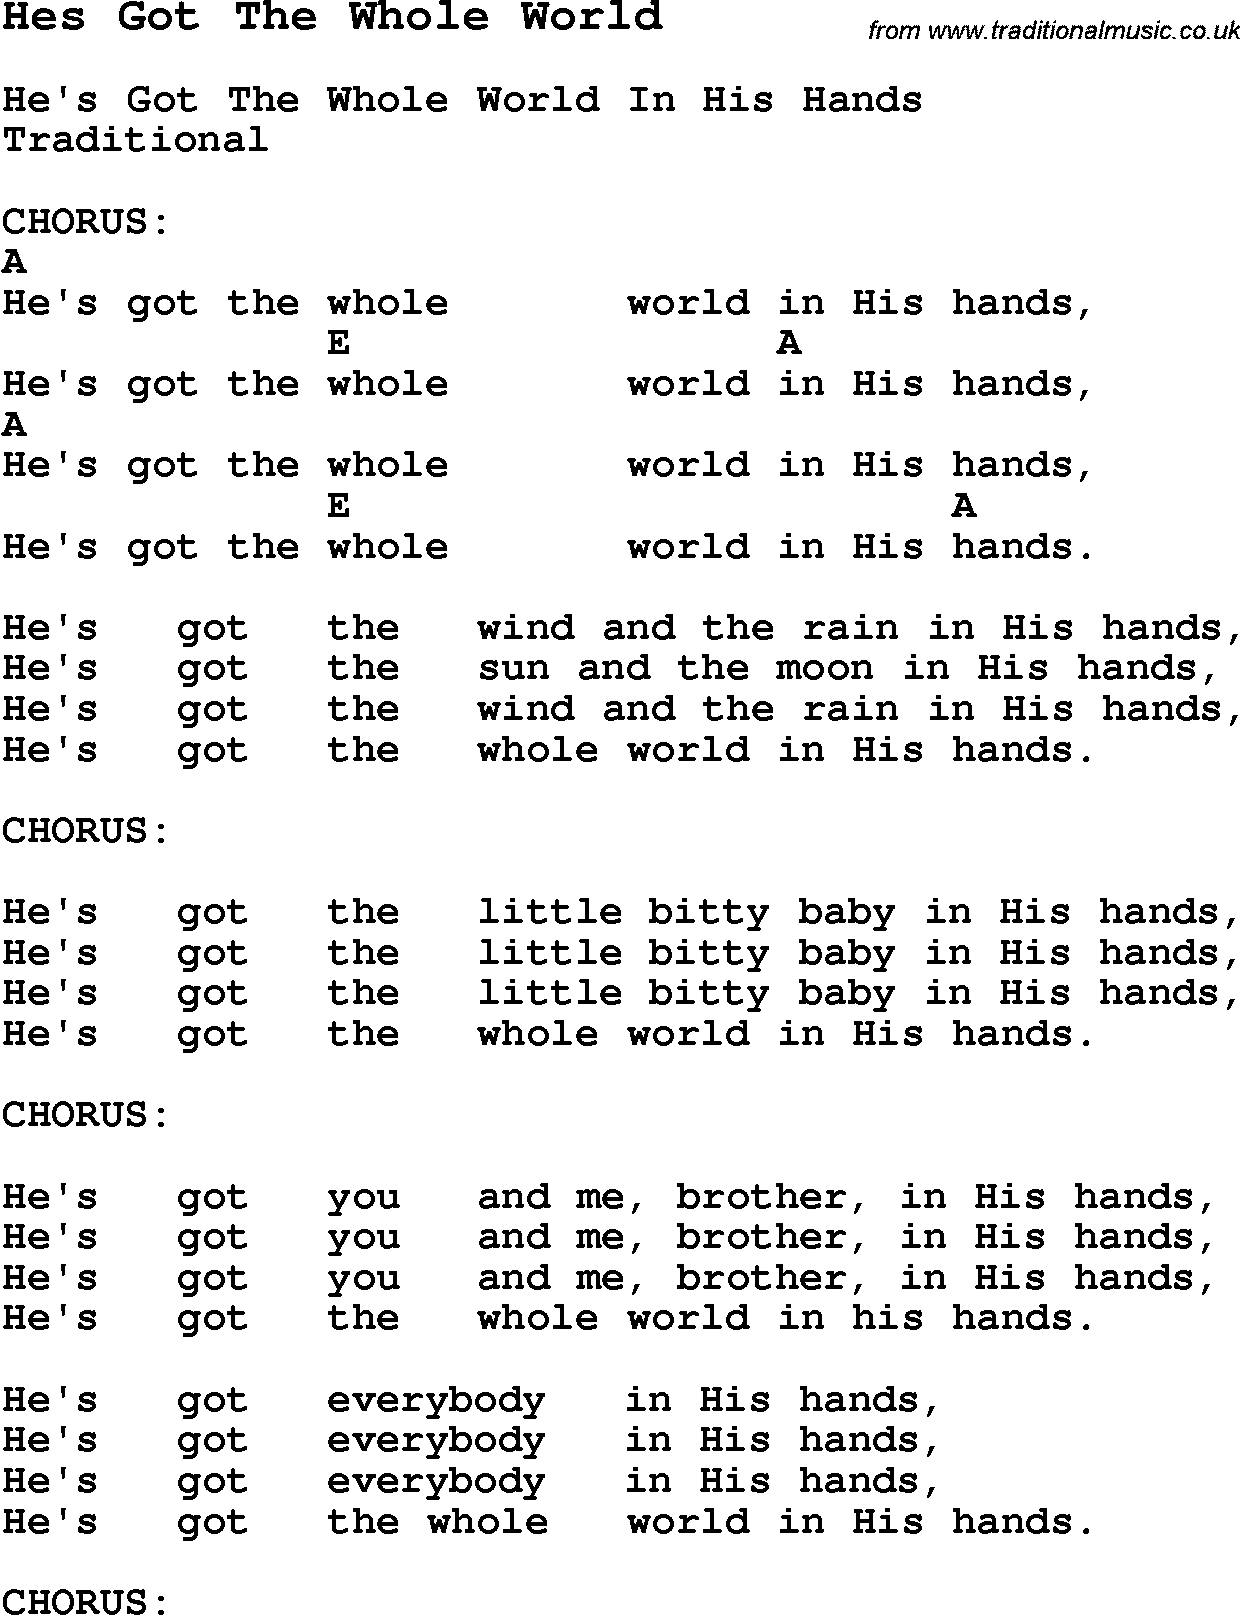 traditional-song-hes-got-the-whole-world-with-chords-tabs-and-lyrics